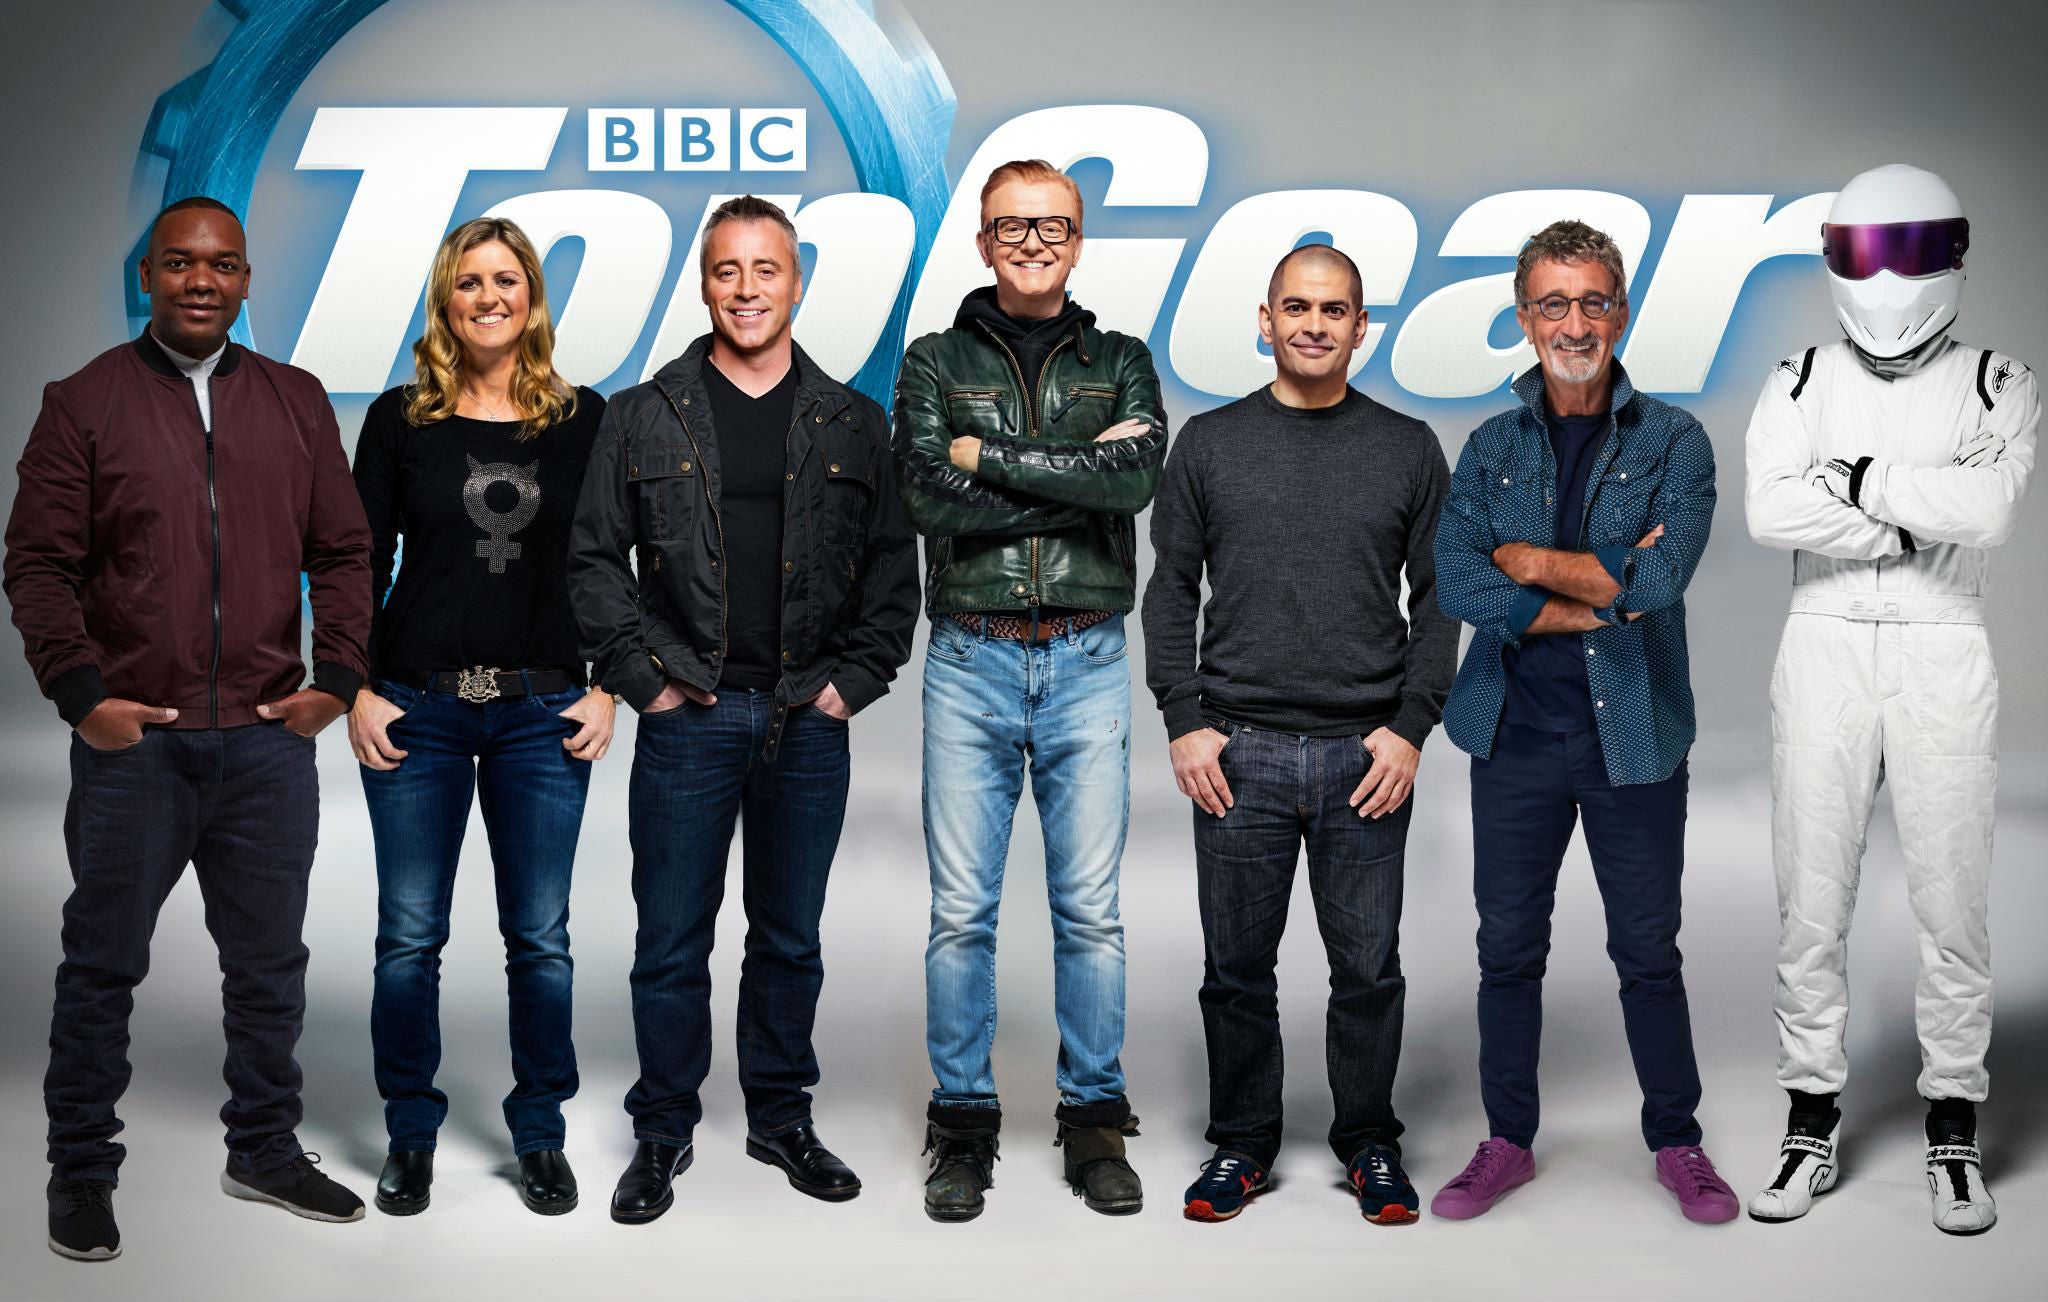 Top Gear returns to BBC Two this May for more hair-raising fun on the roads